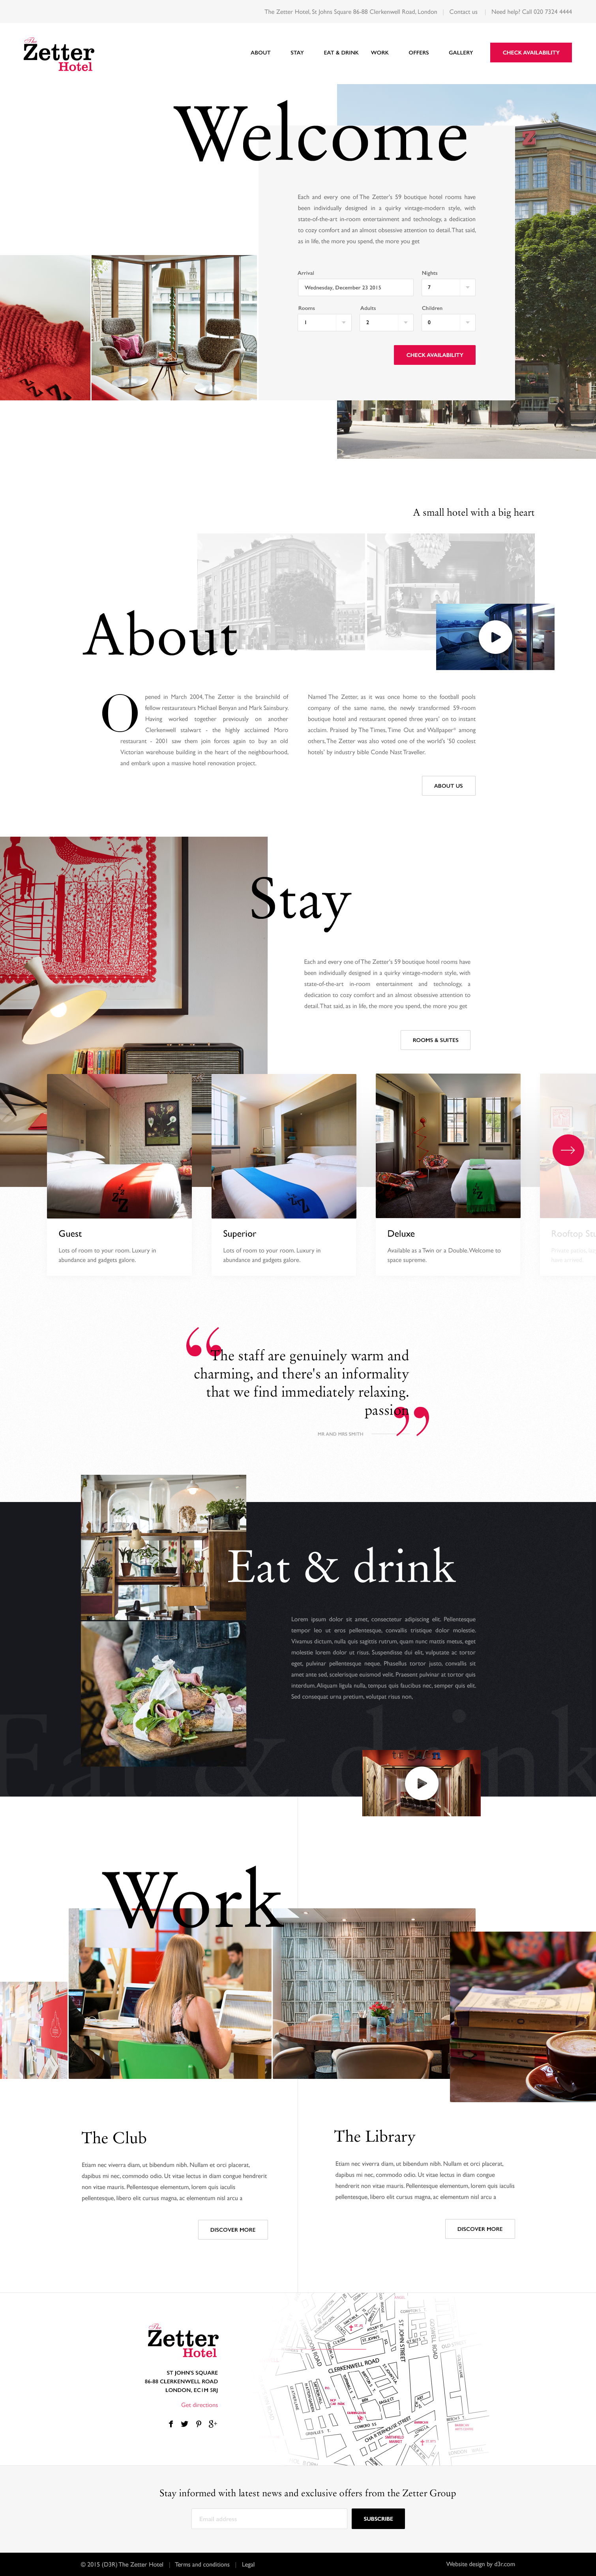 The Zetter Hotel - Homepage pitch